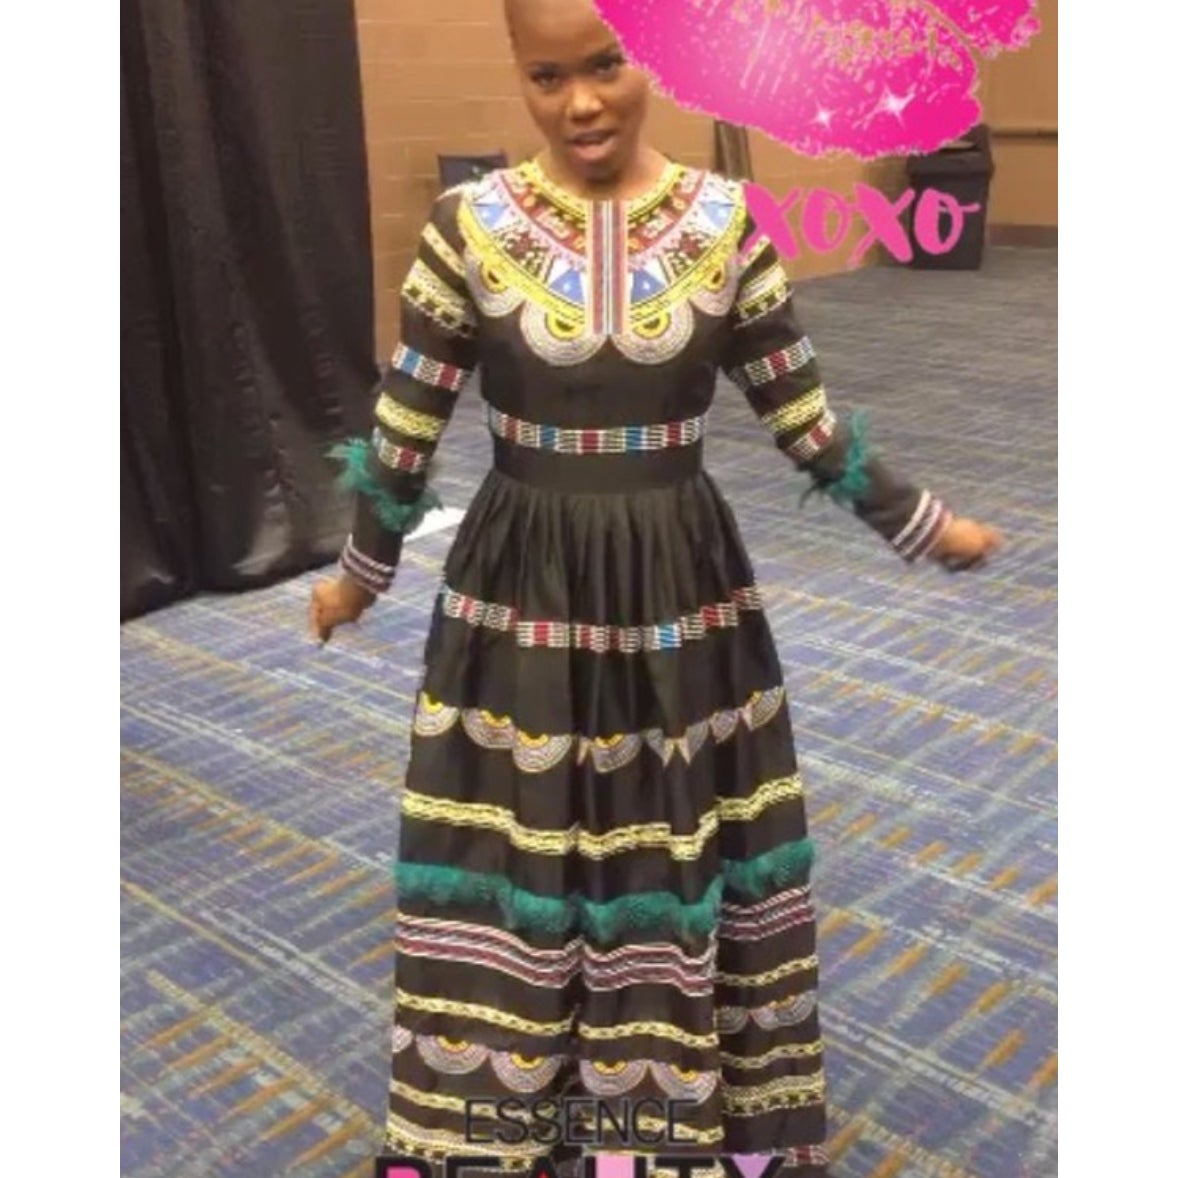 24 of The Best Celeb Instagram Photos From ESSENCE Festival 2016